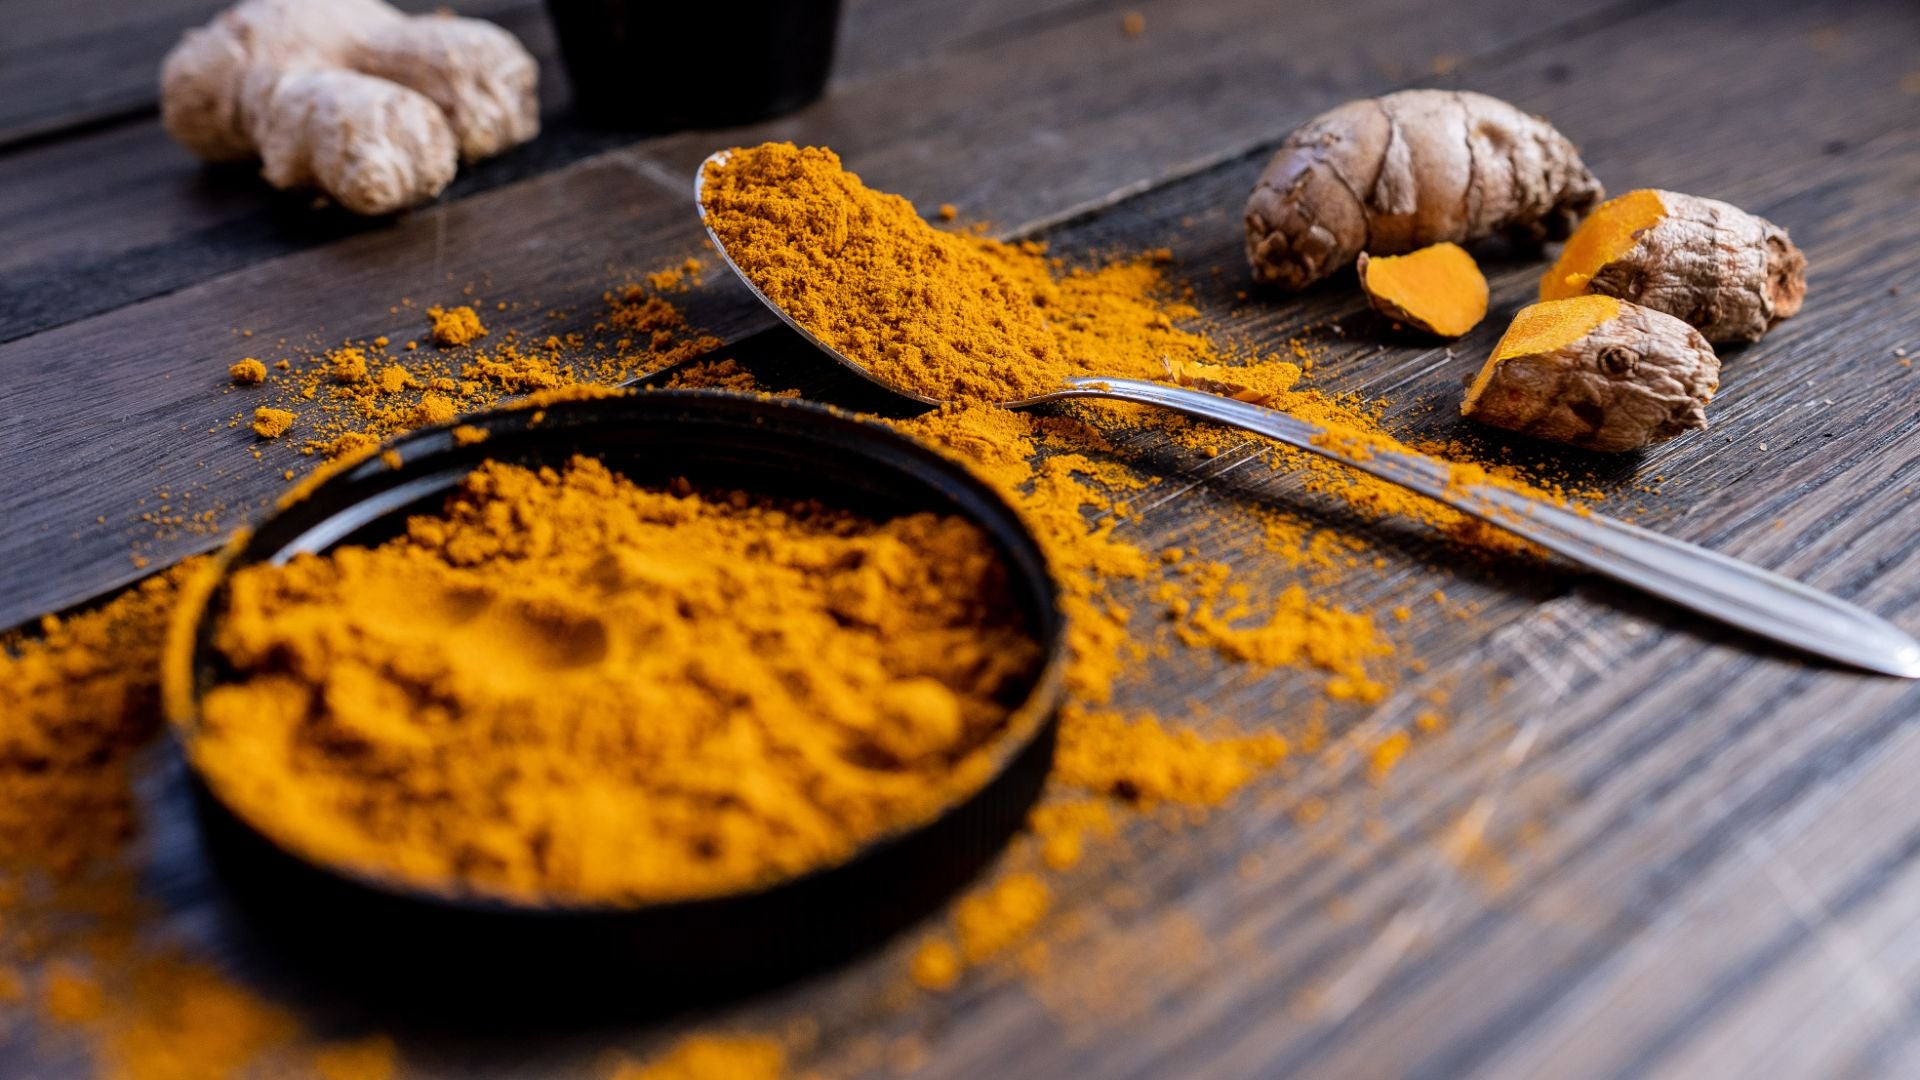 What happens when you take turmeric everyday?